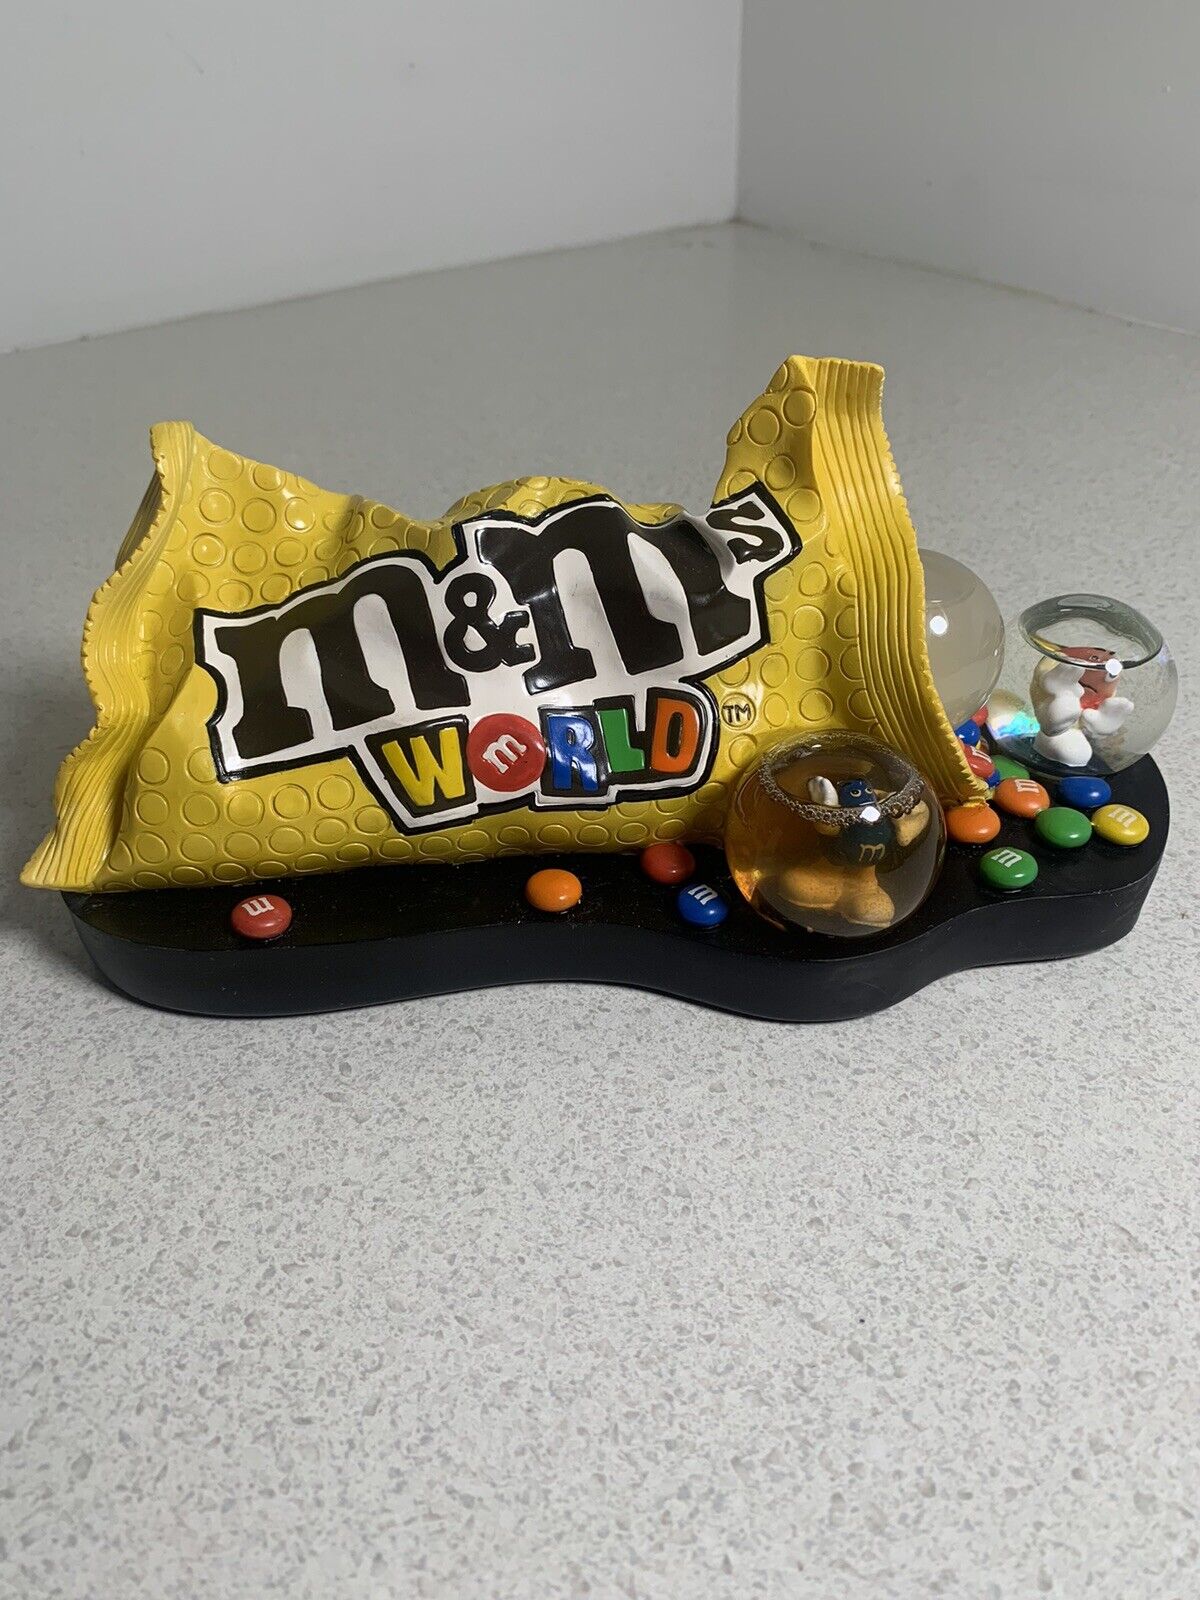 M&M’s World 2006 Chocolate Candy Collectors Bag Spilled Snow Globe Display READ